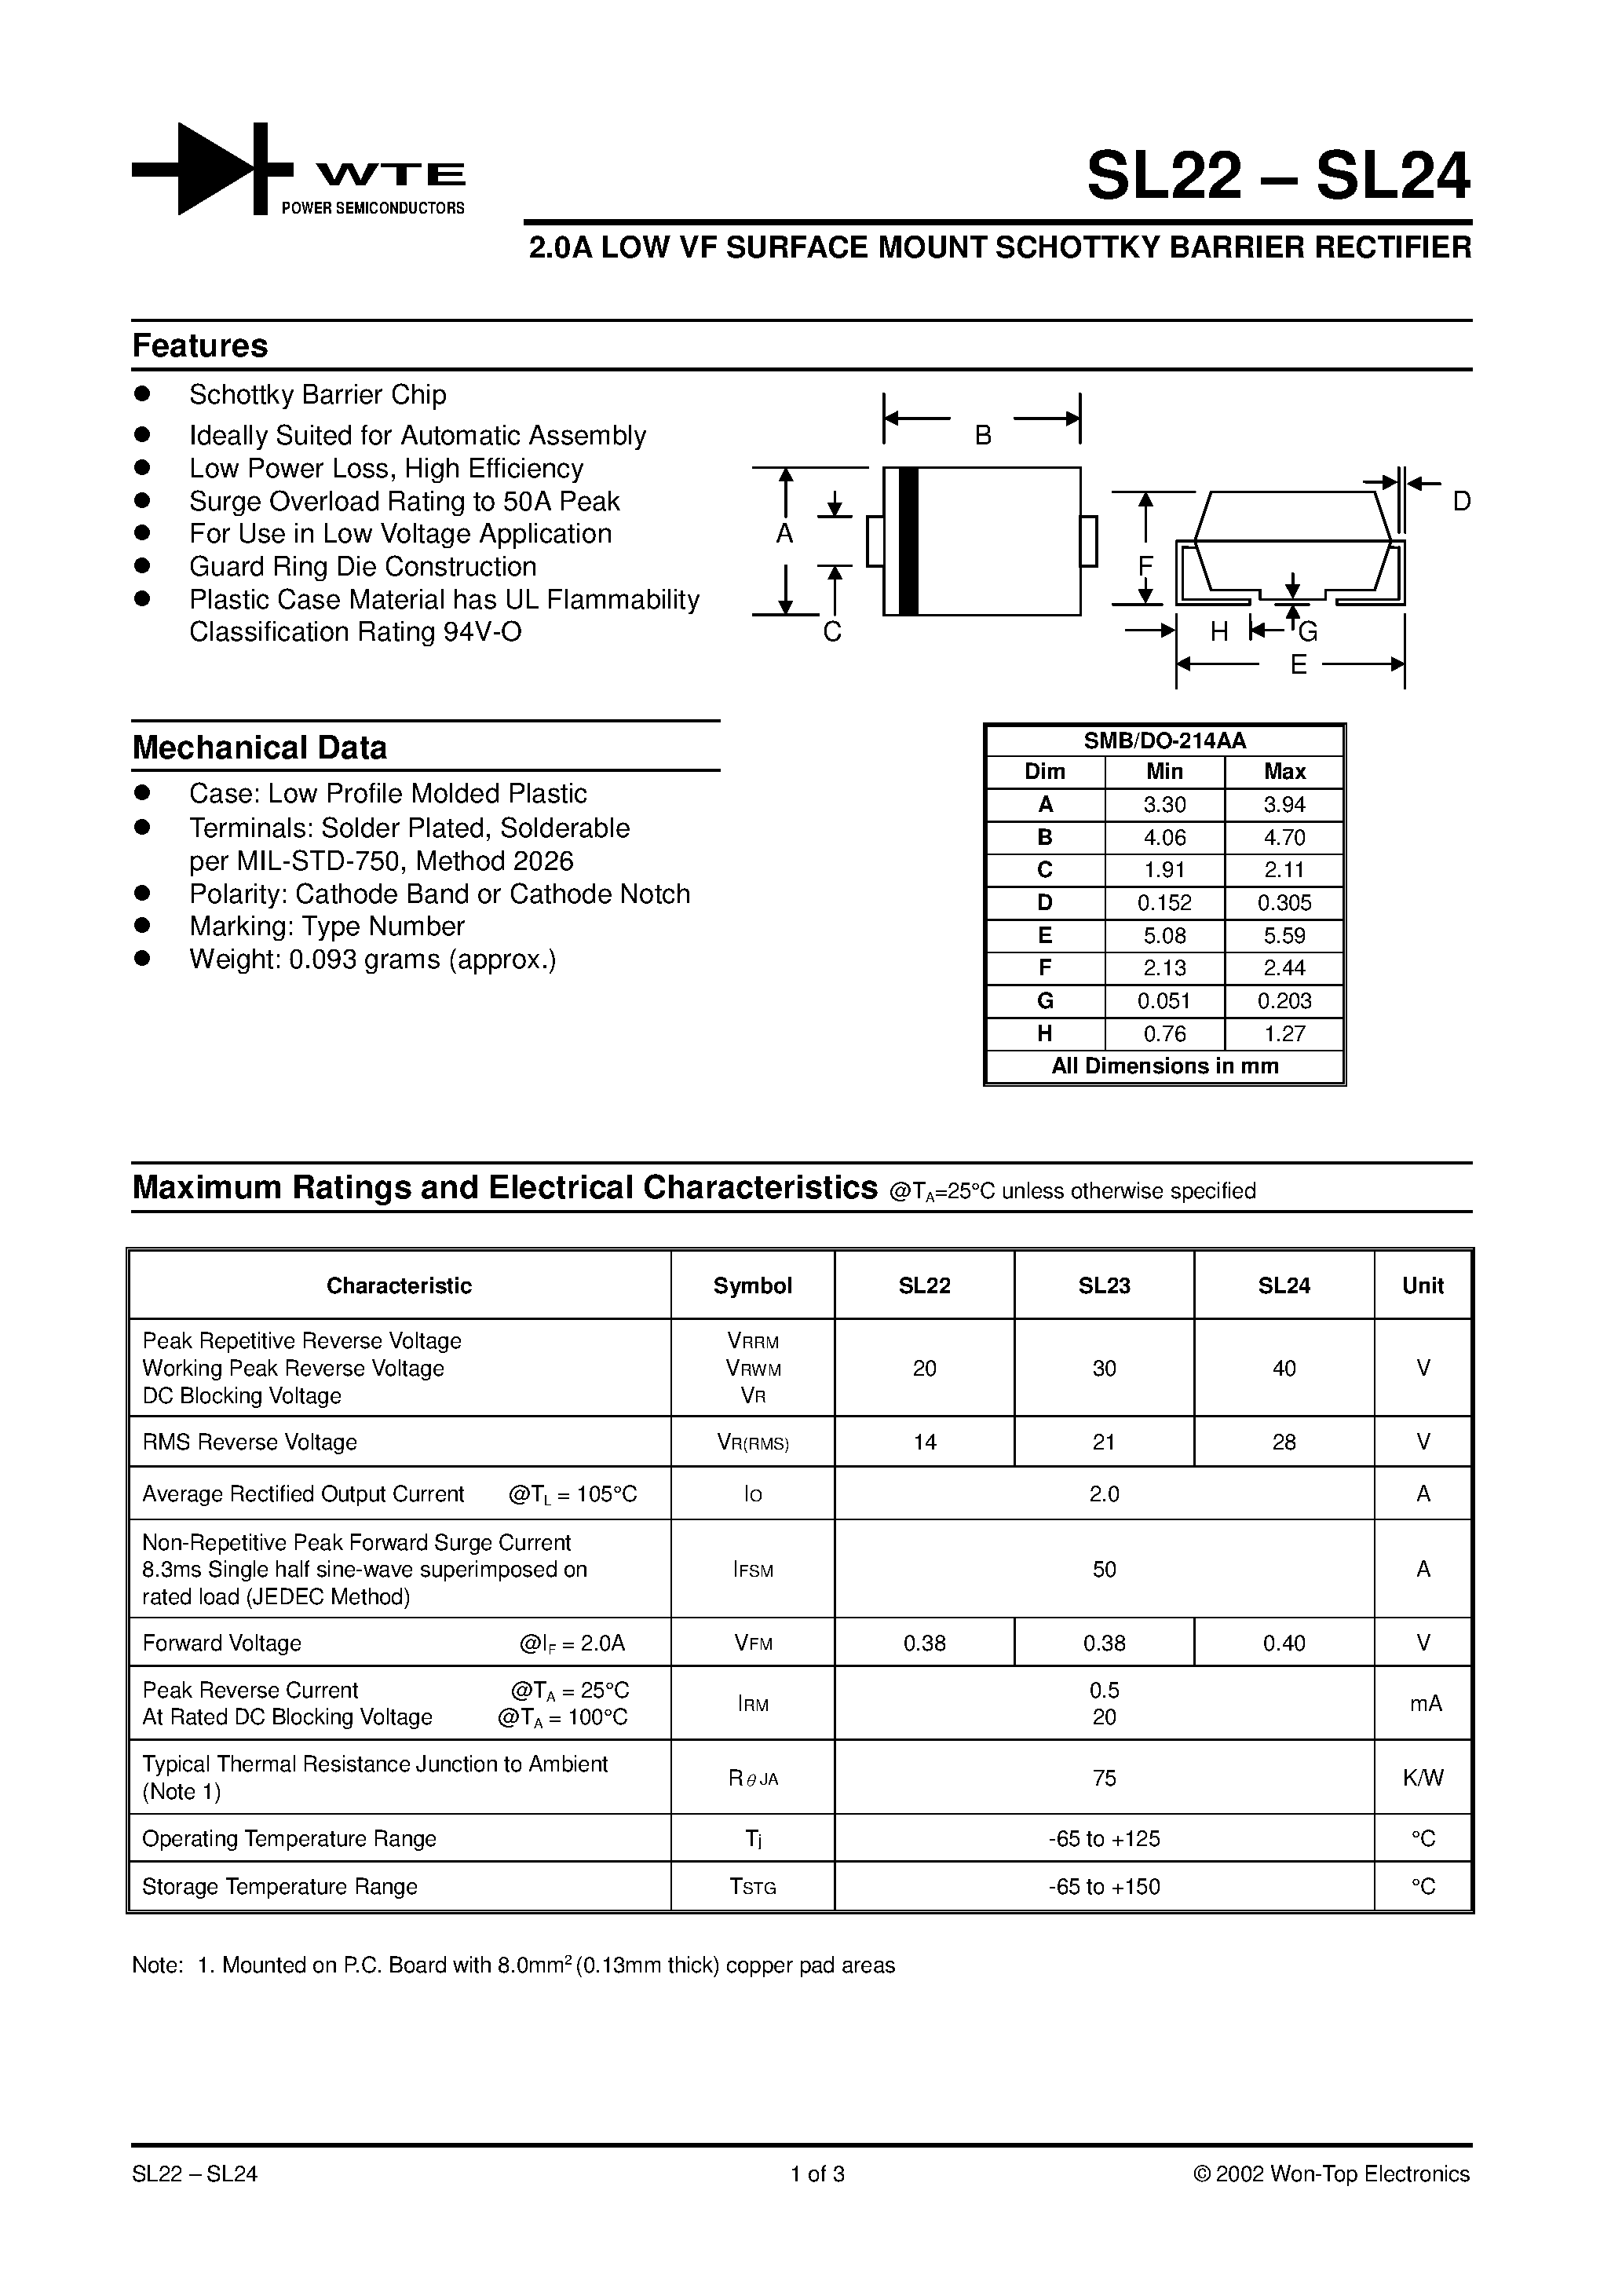 Datasheet SL23-T3 - 2.0A LOW VF SURFACE MOUNT SCHOTTKY BARRIER RECTIFIER page 1